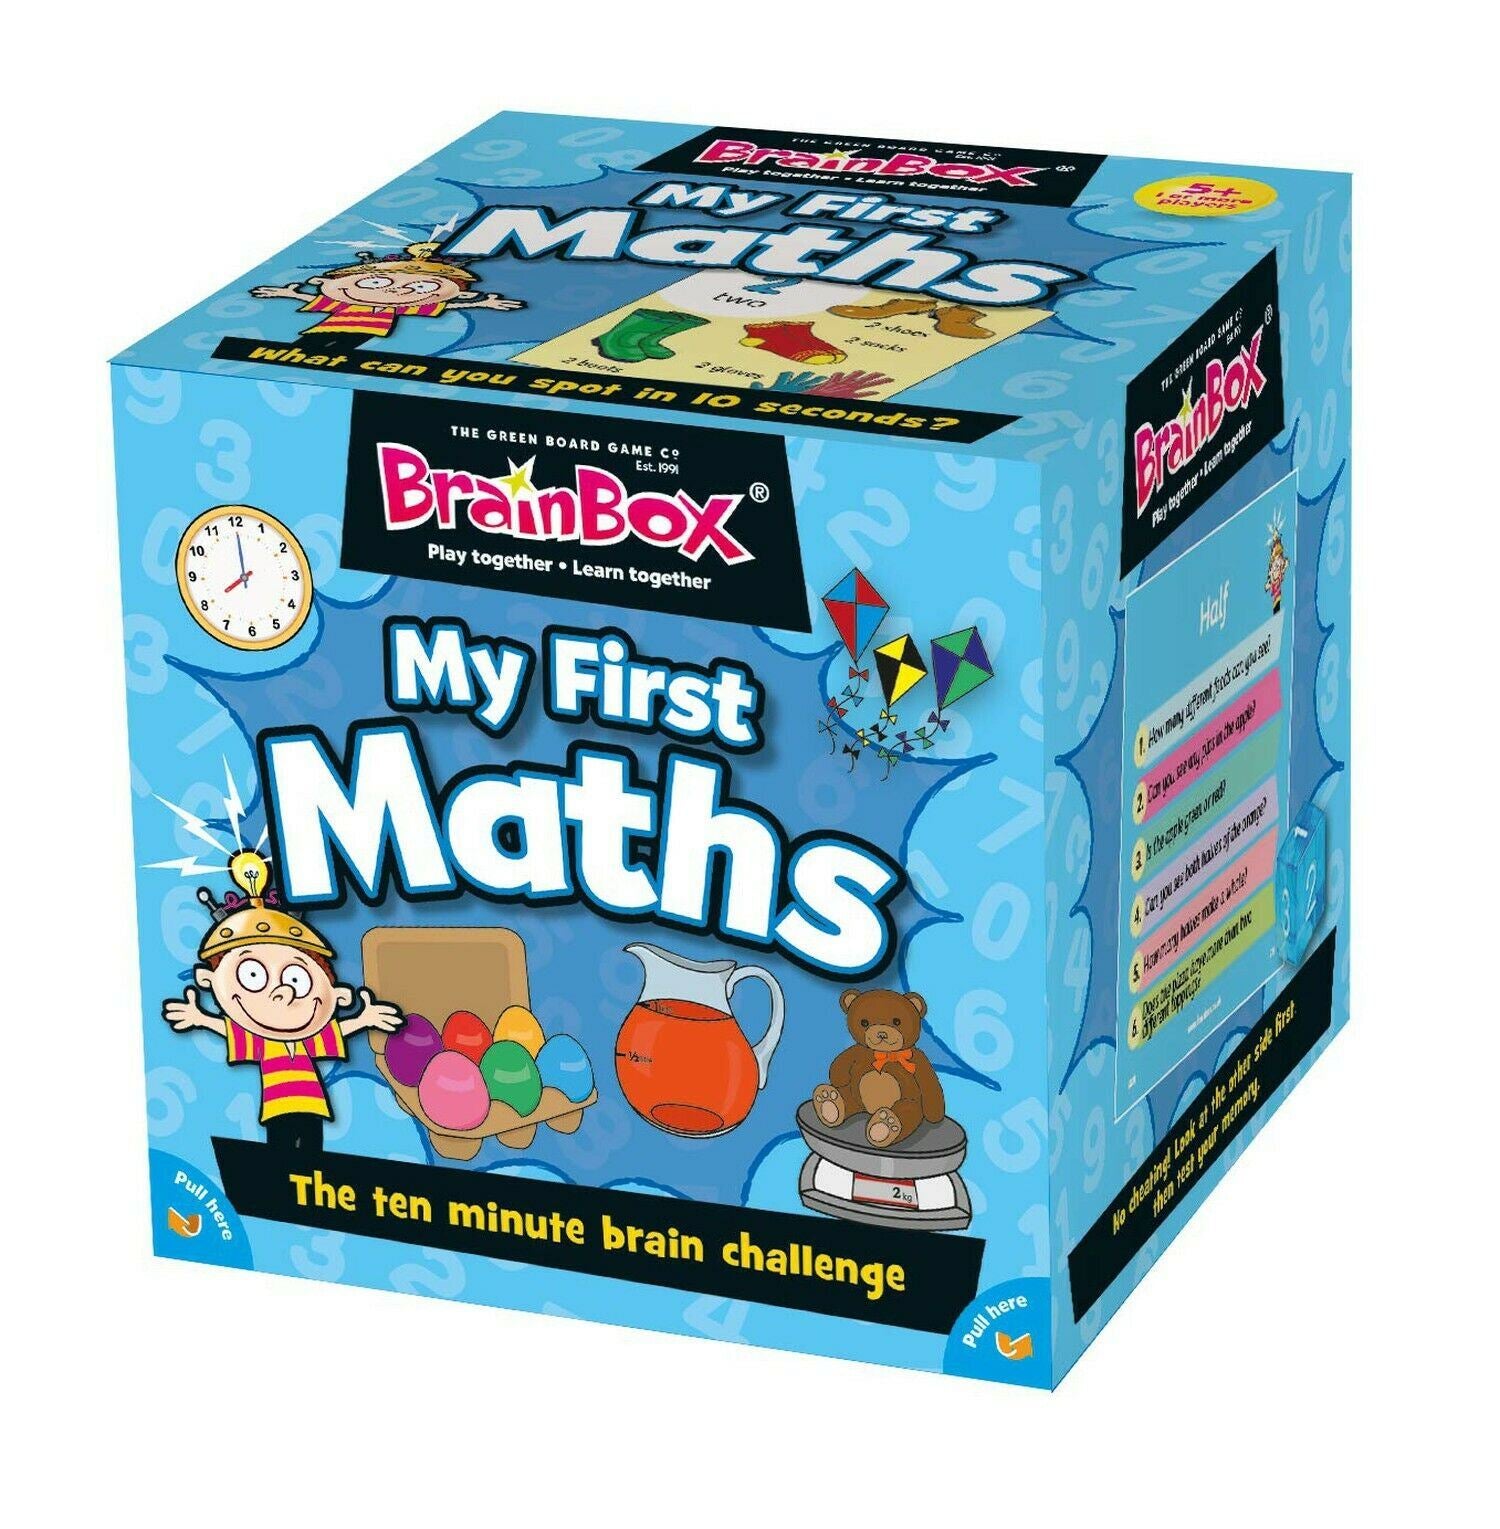 BrainBox MY FIRST MATHS Game - Play Together, Learn Together!